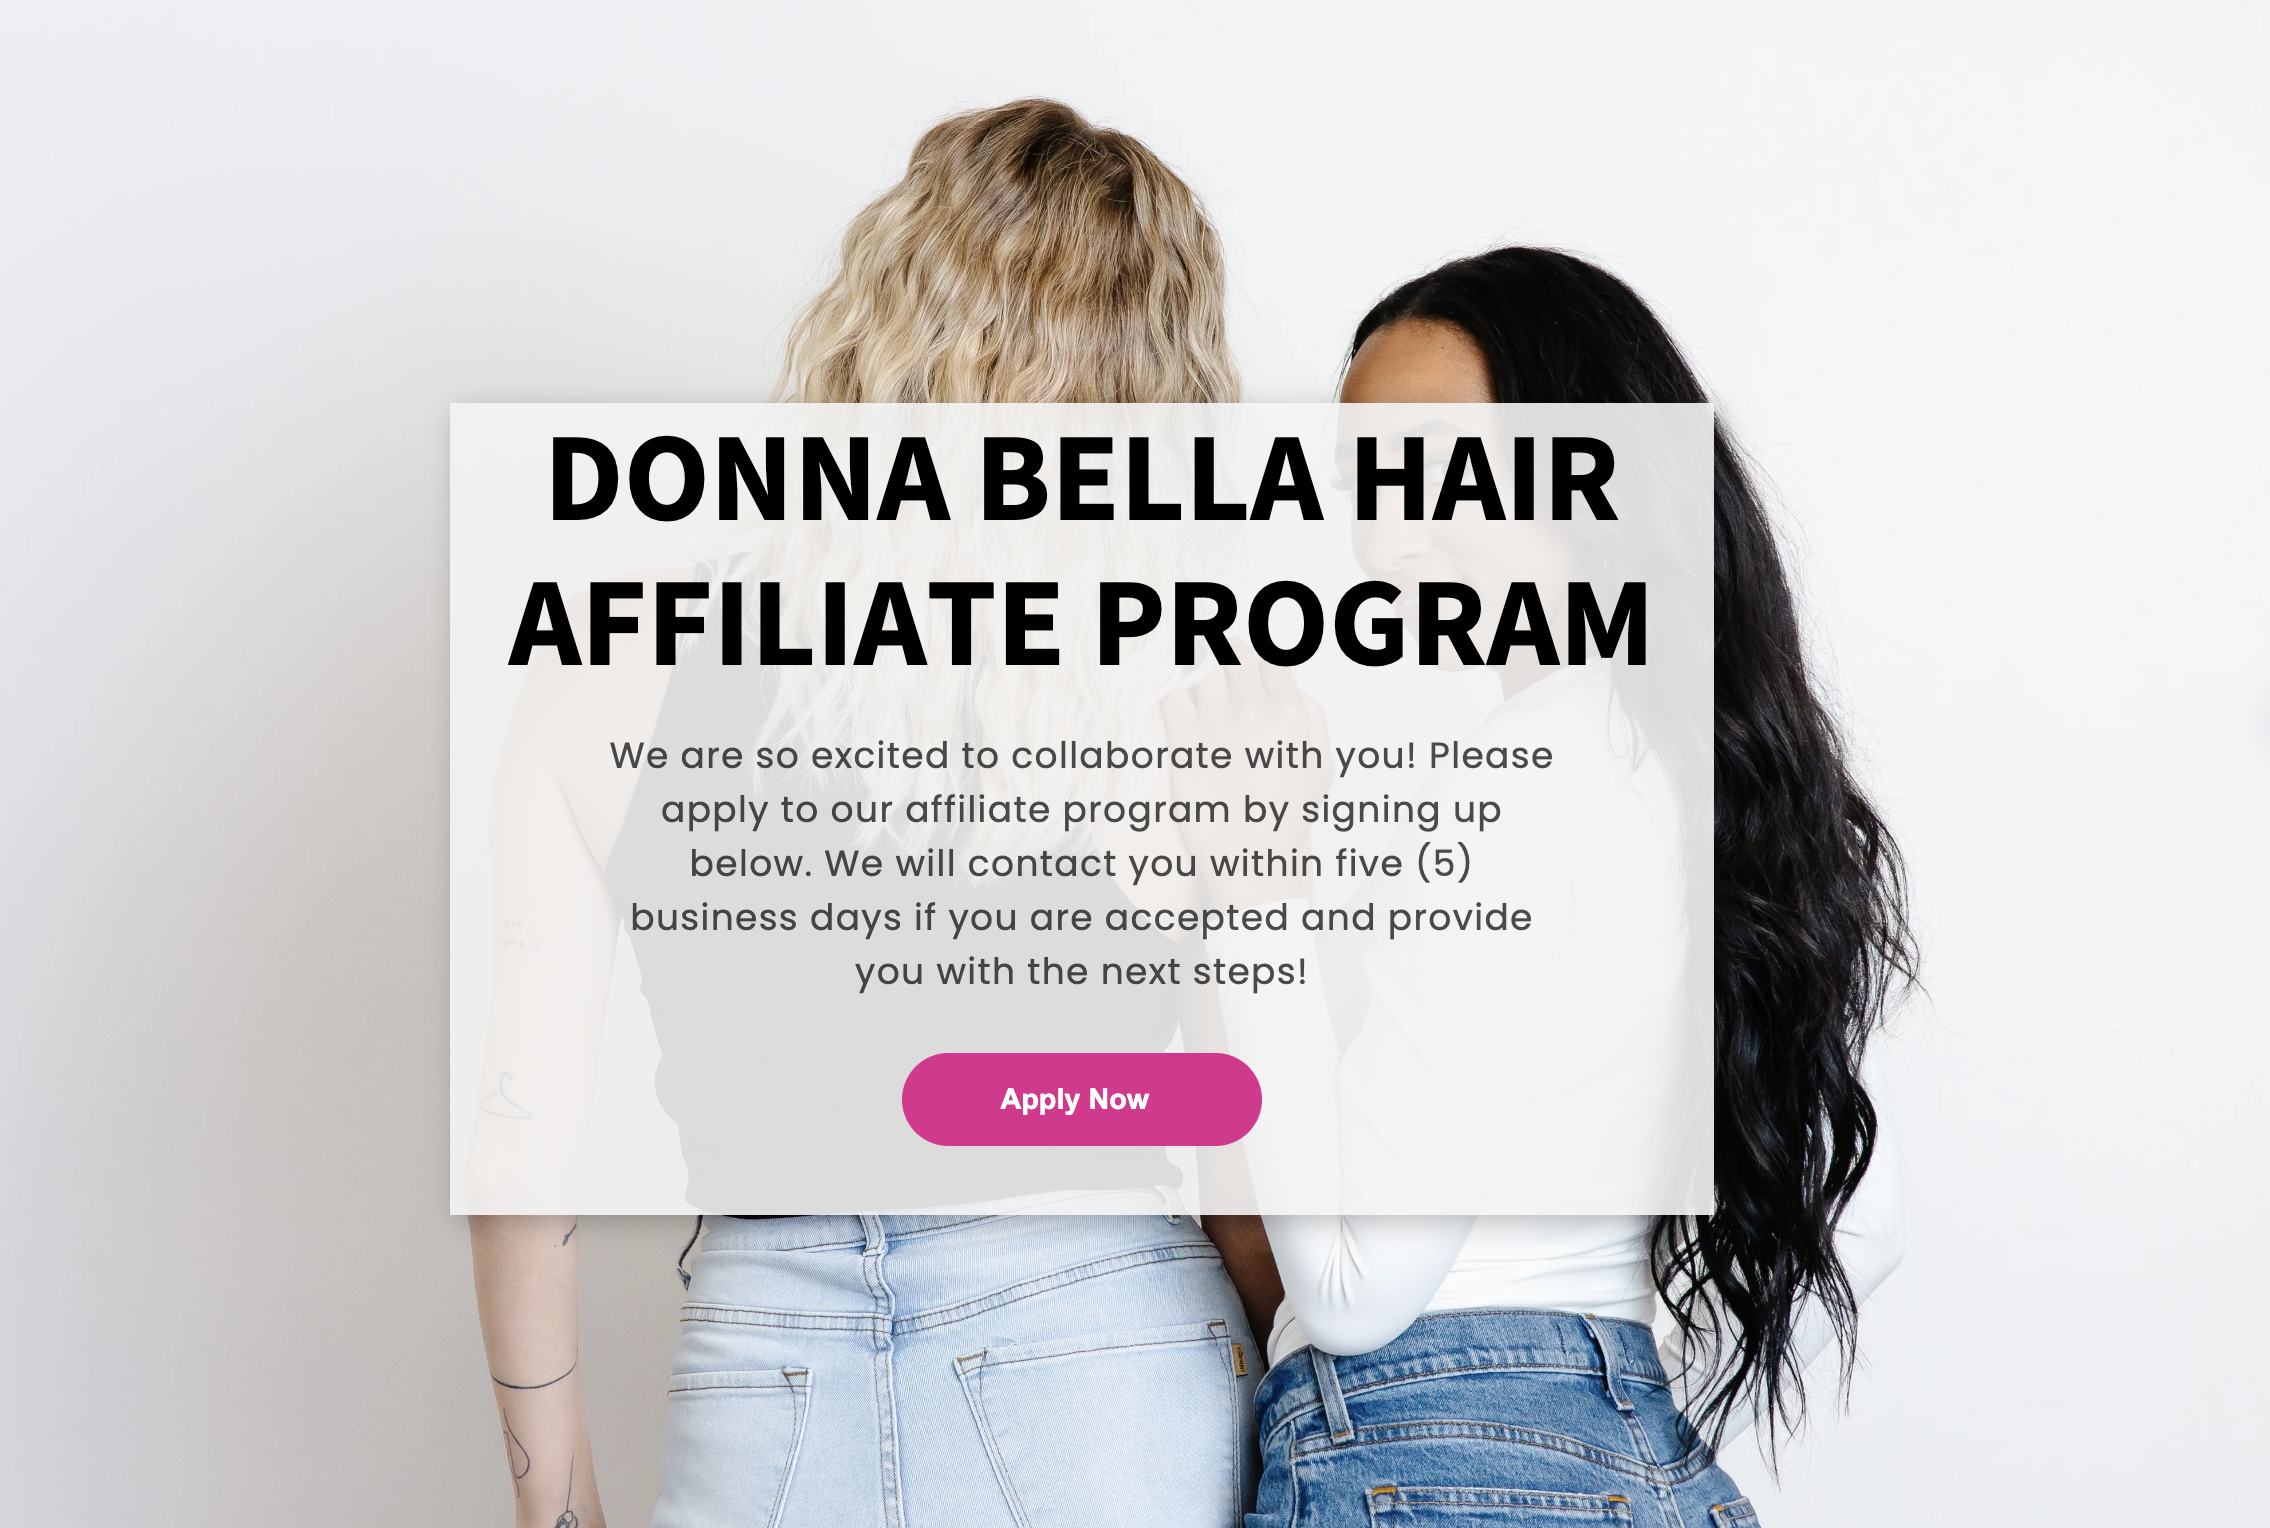 Donna Bella Hair Affiliate Program sign-up page. Applicants can plan to hear back in 5 business days. 